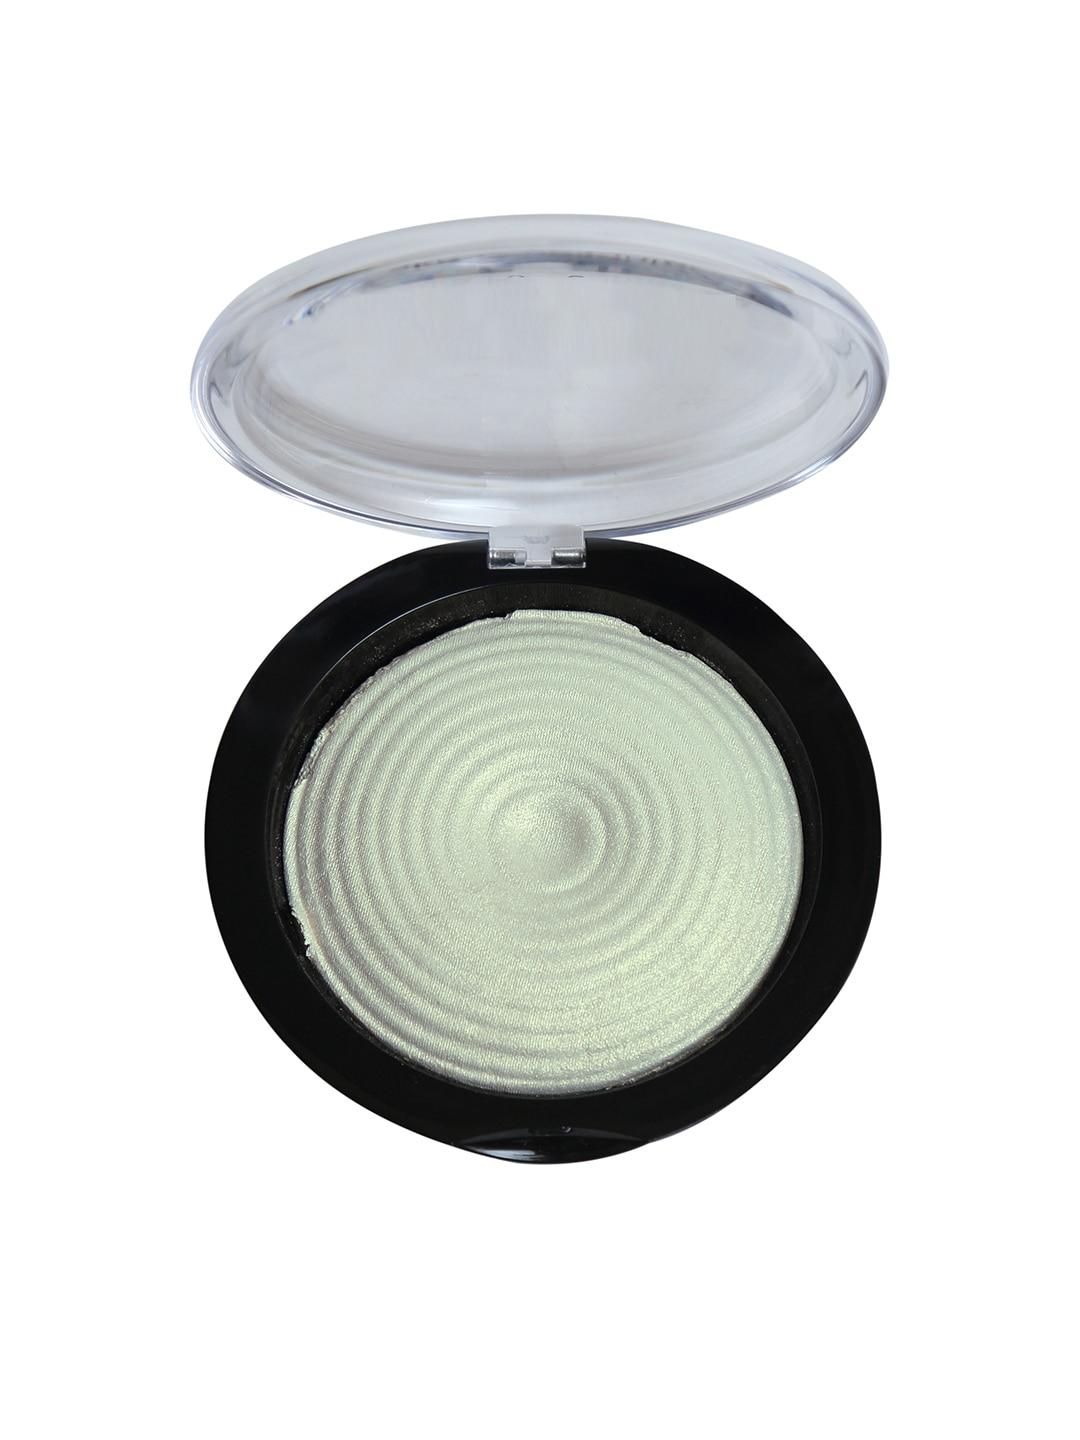 miss claire 02 baked highlighter 8 g